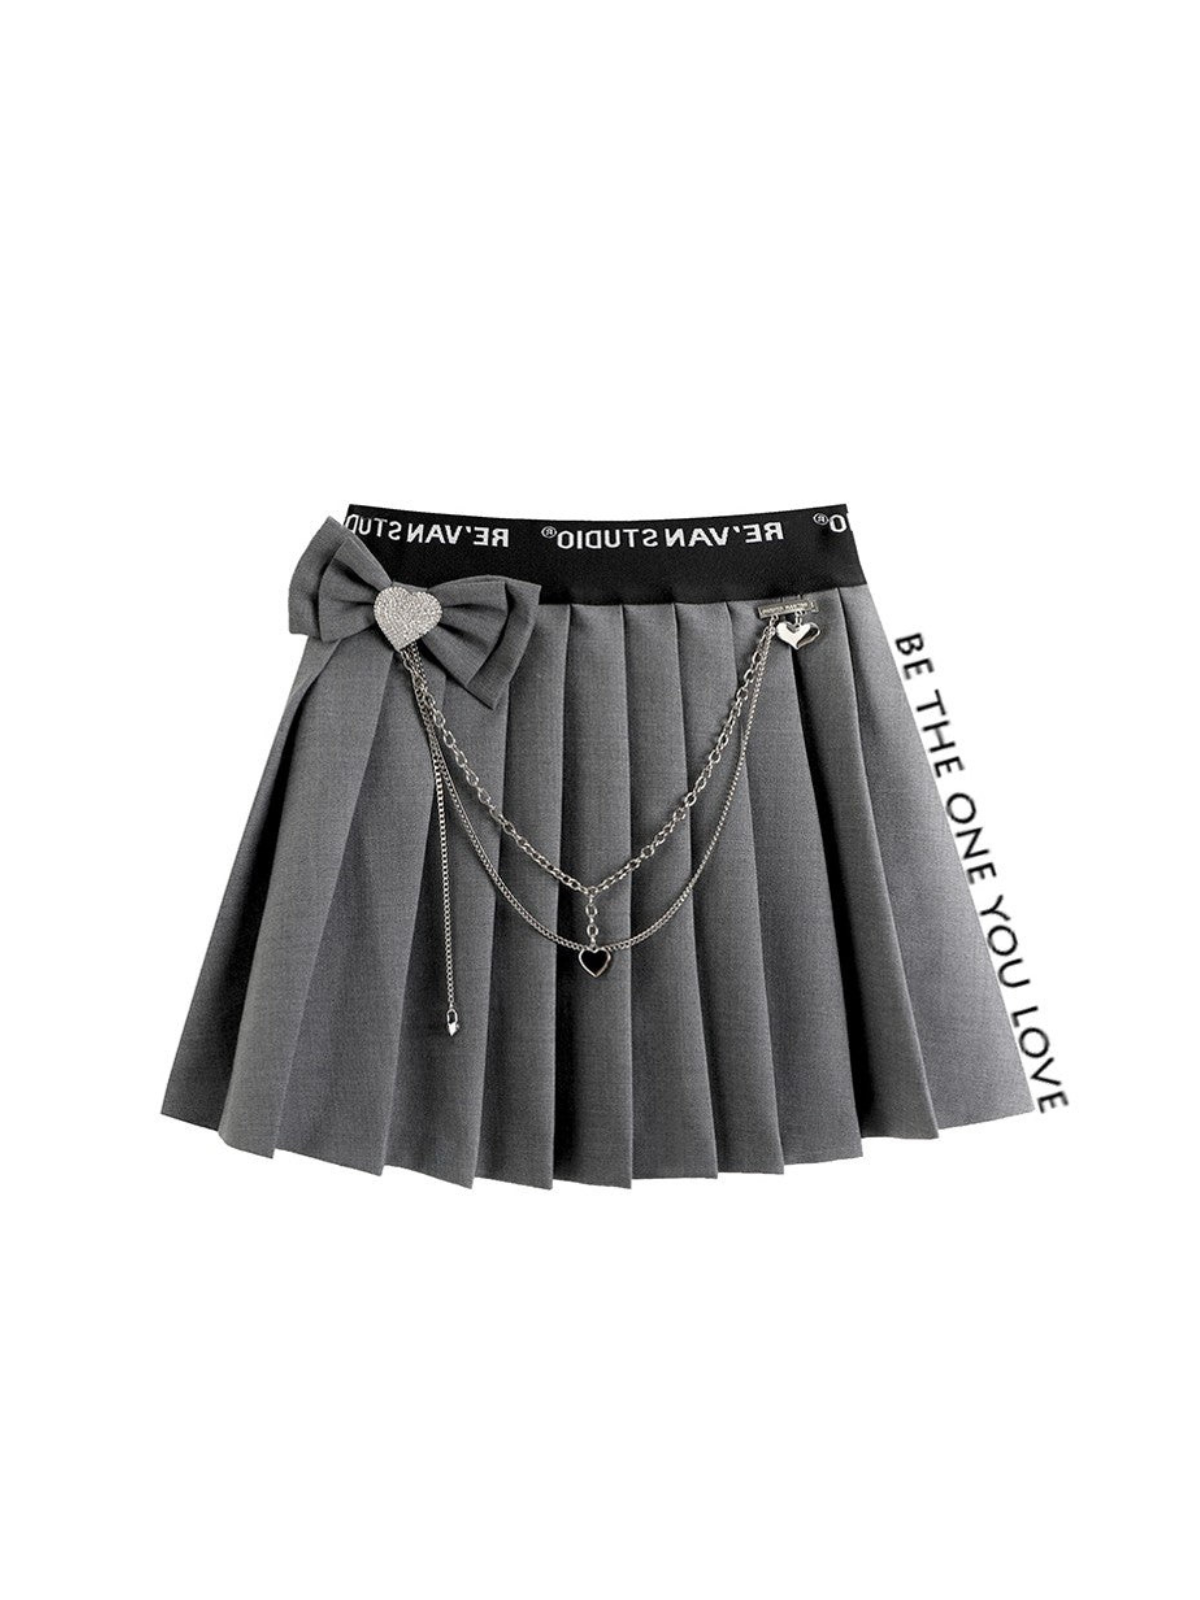 Pleated skirt with jewel heart chain strap